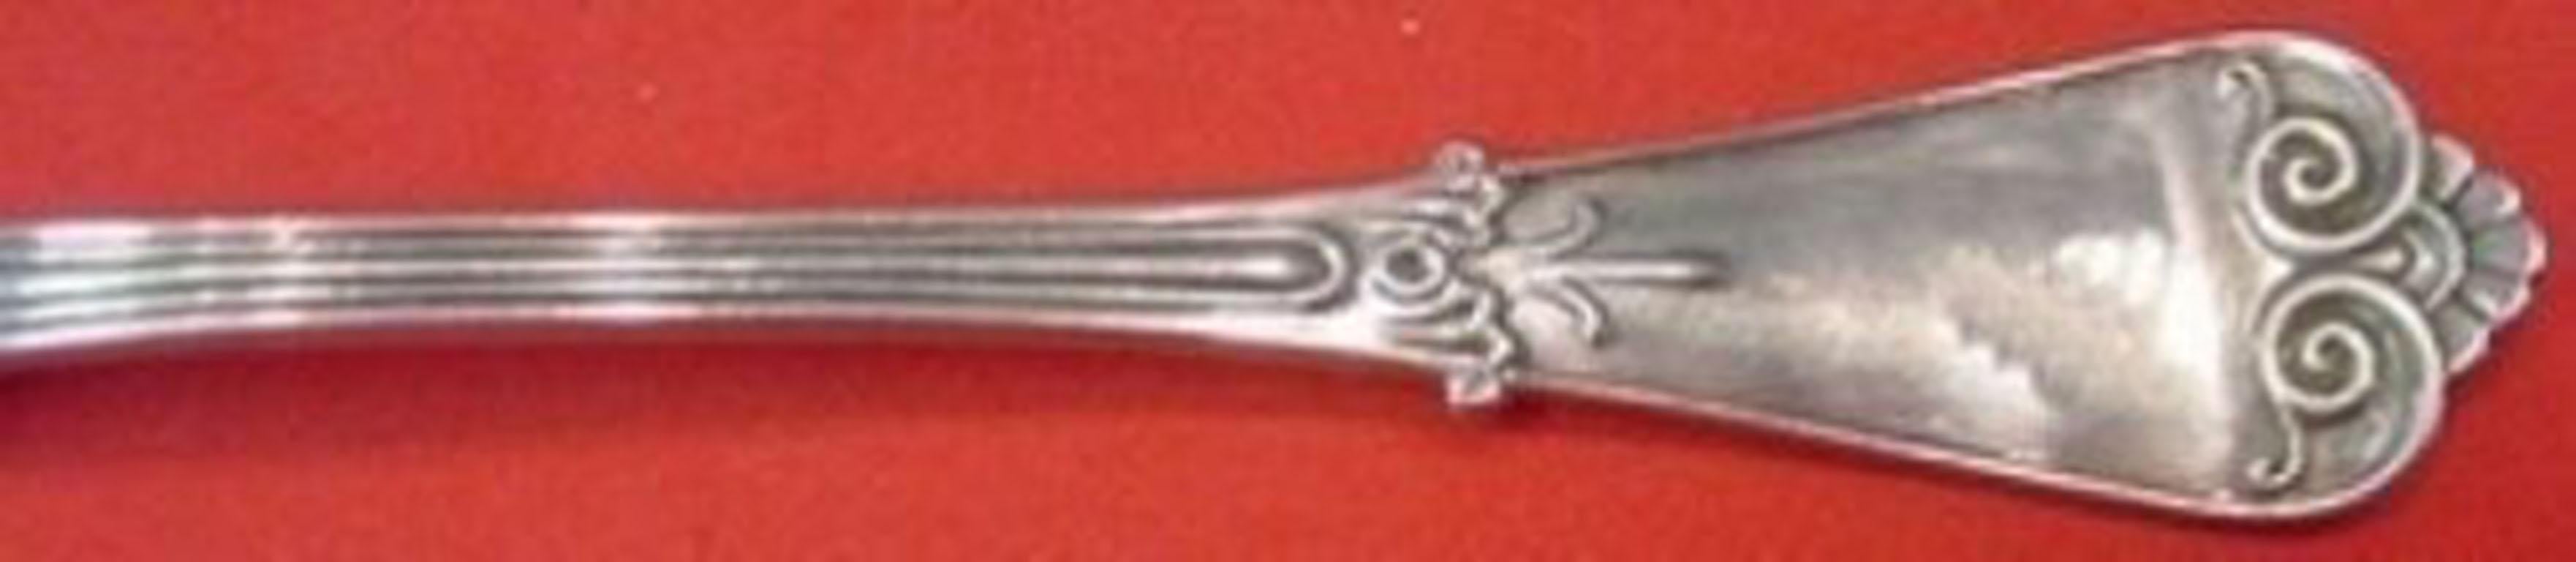 Sterling silver flat handle fish knife all-sterling 8 1/8” in the pattern Edgewood by International. It is monogrammed (monos vary) and is in excellent condition.

Satisfaction guaranteed!
    